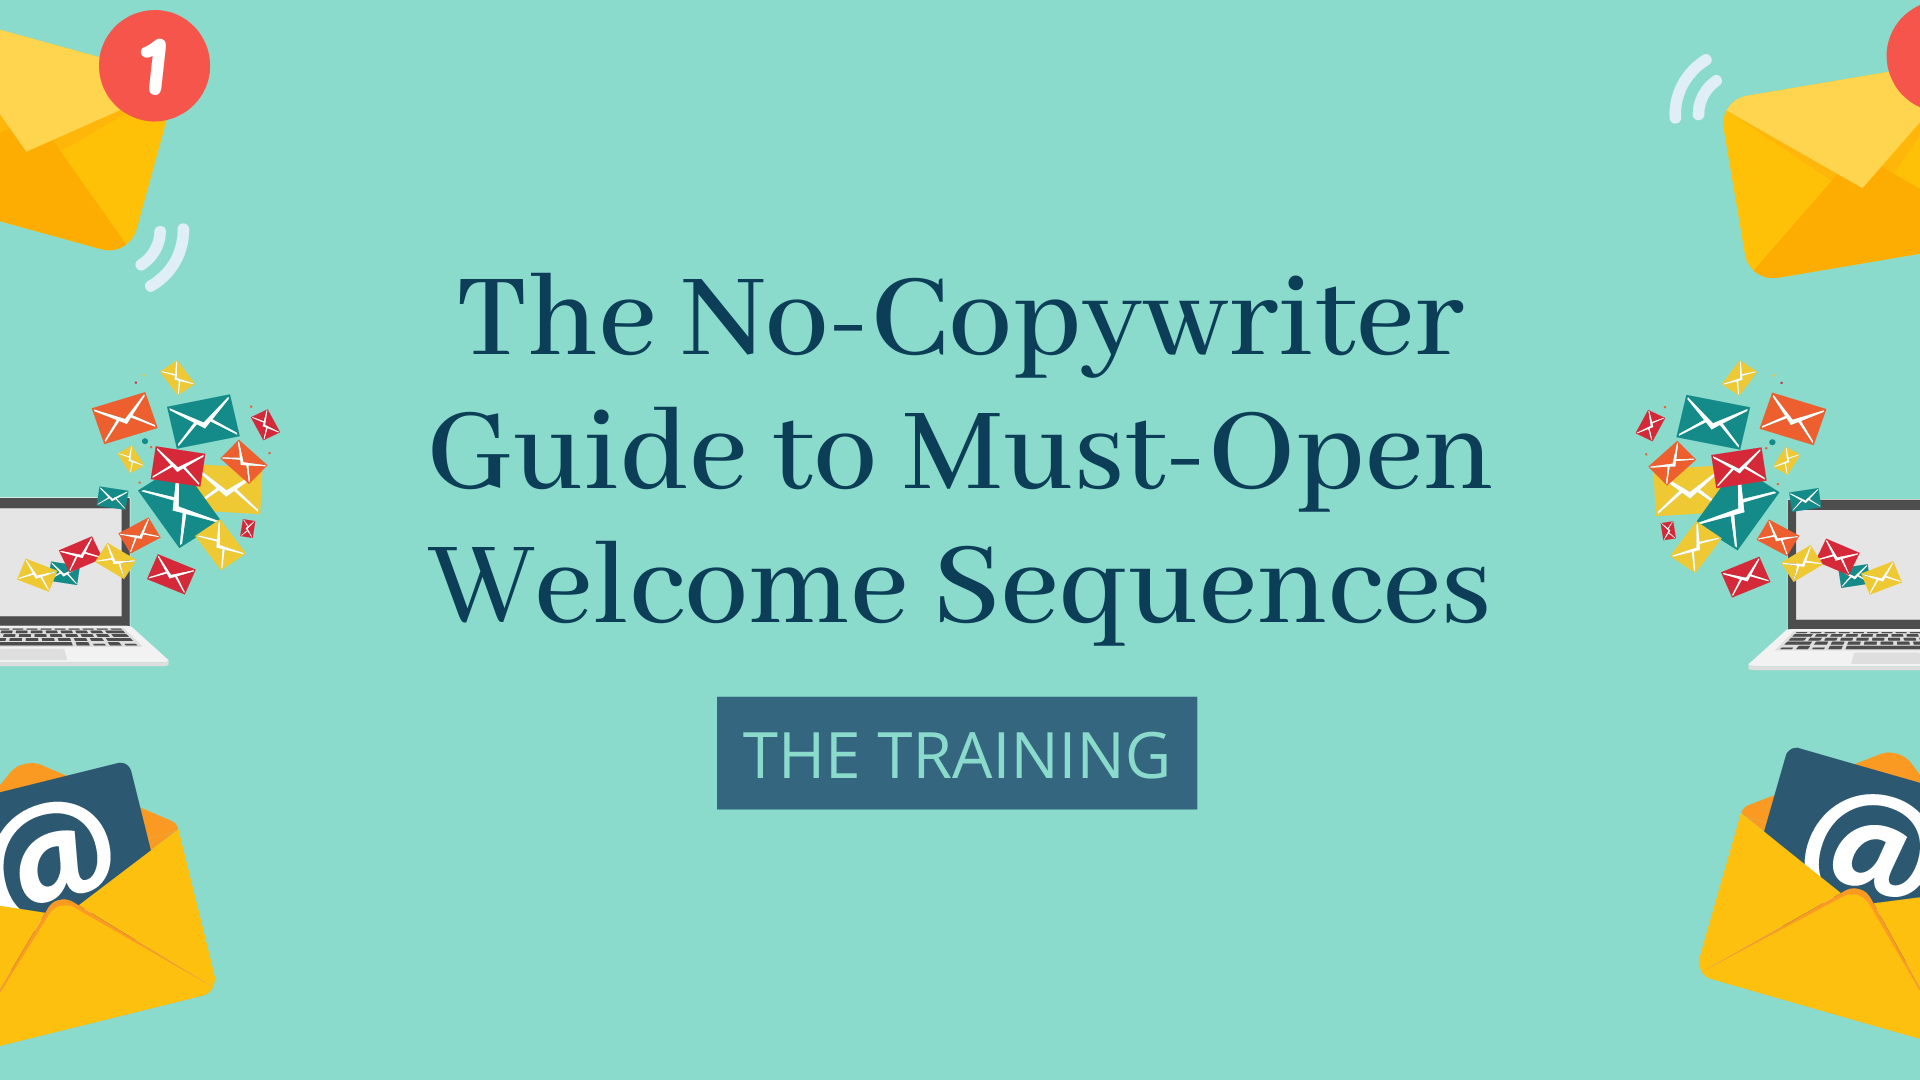 No-Copywriter Guide to Must-Open Welcome Sequences